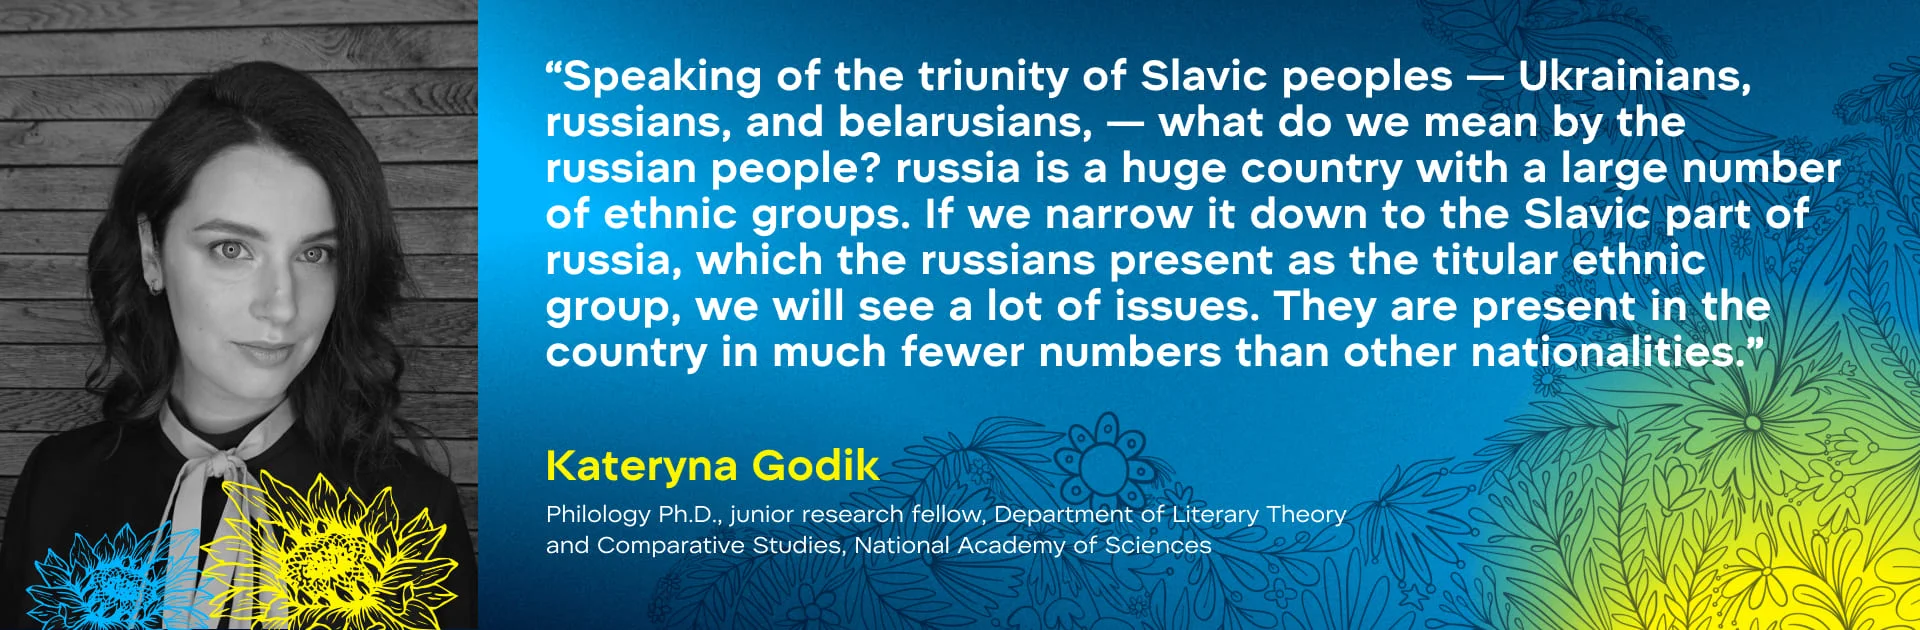 Kateryna Godik, philology Ph.D., junior research fellow at the Department of Literary Theory and Comparative Studies of the National Academy of Sciences. Credit: WePlay Holding